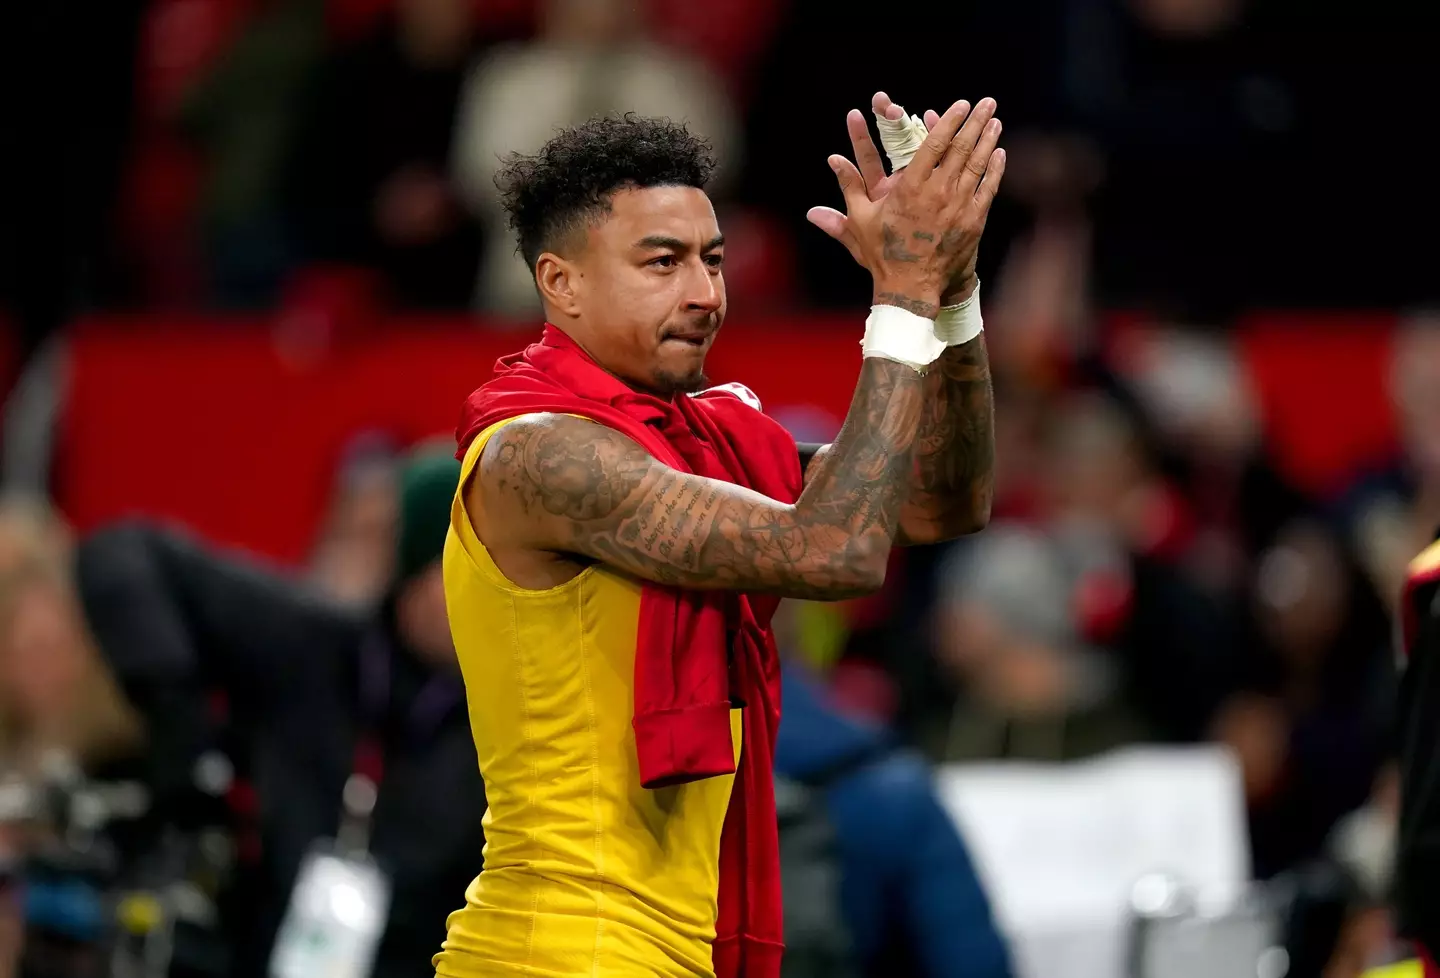 Lingard applauds the fans after leaving the game for Forest. Image: Alamy